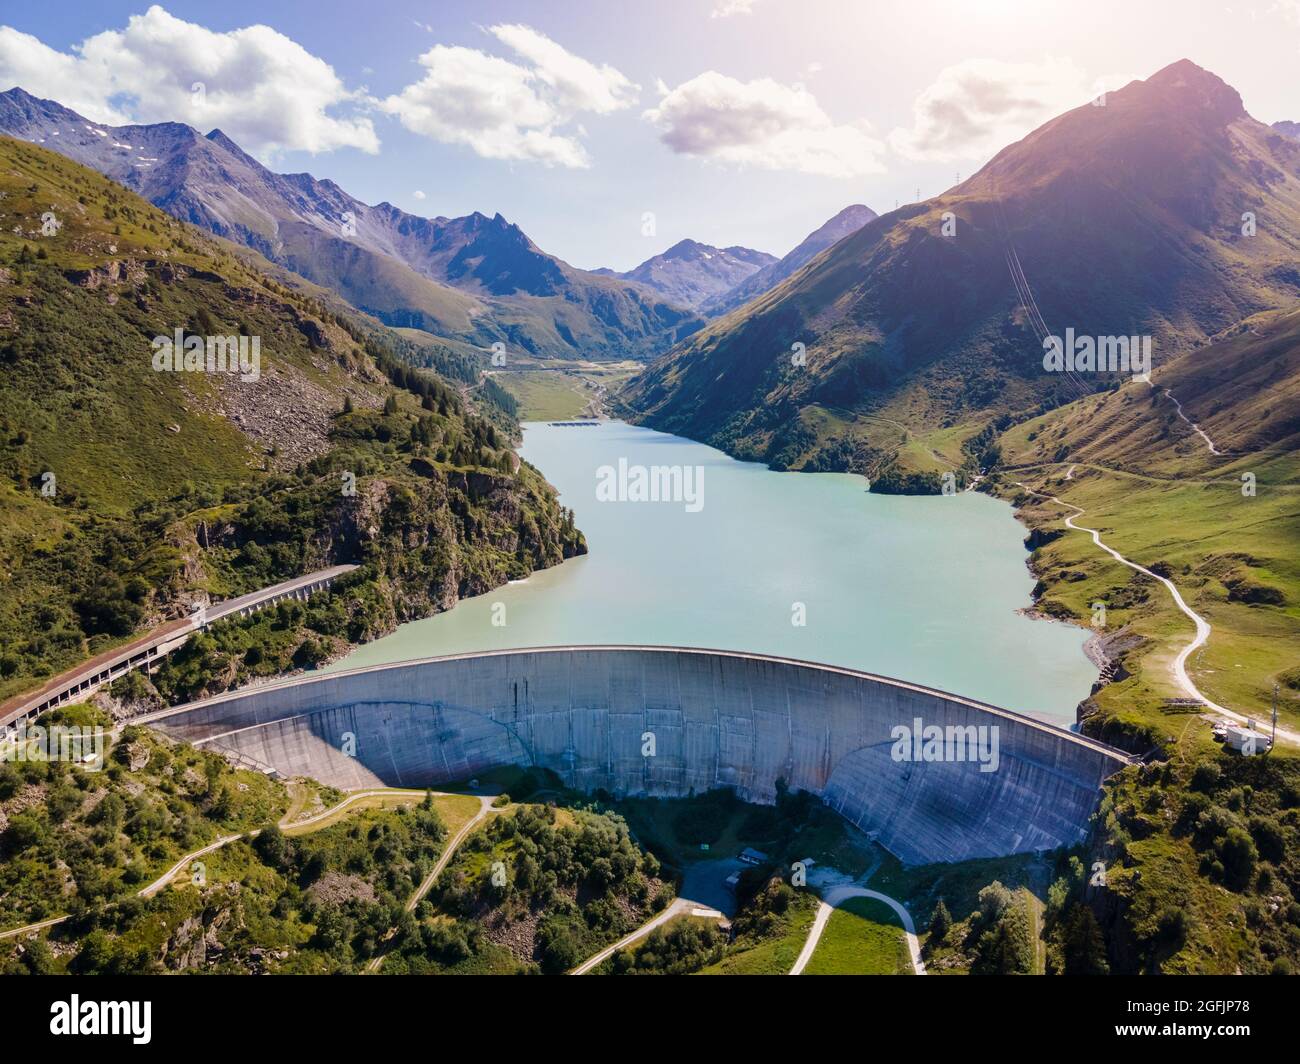 Water dam and reservoir lake in Swiss Alps generating hydroelectricity. Aerial view of arch dam between mountains. Hydropower green energy for sustain Stock Photo